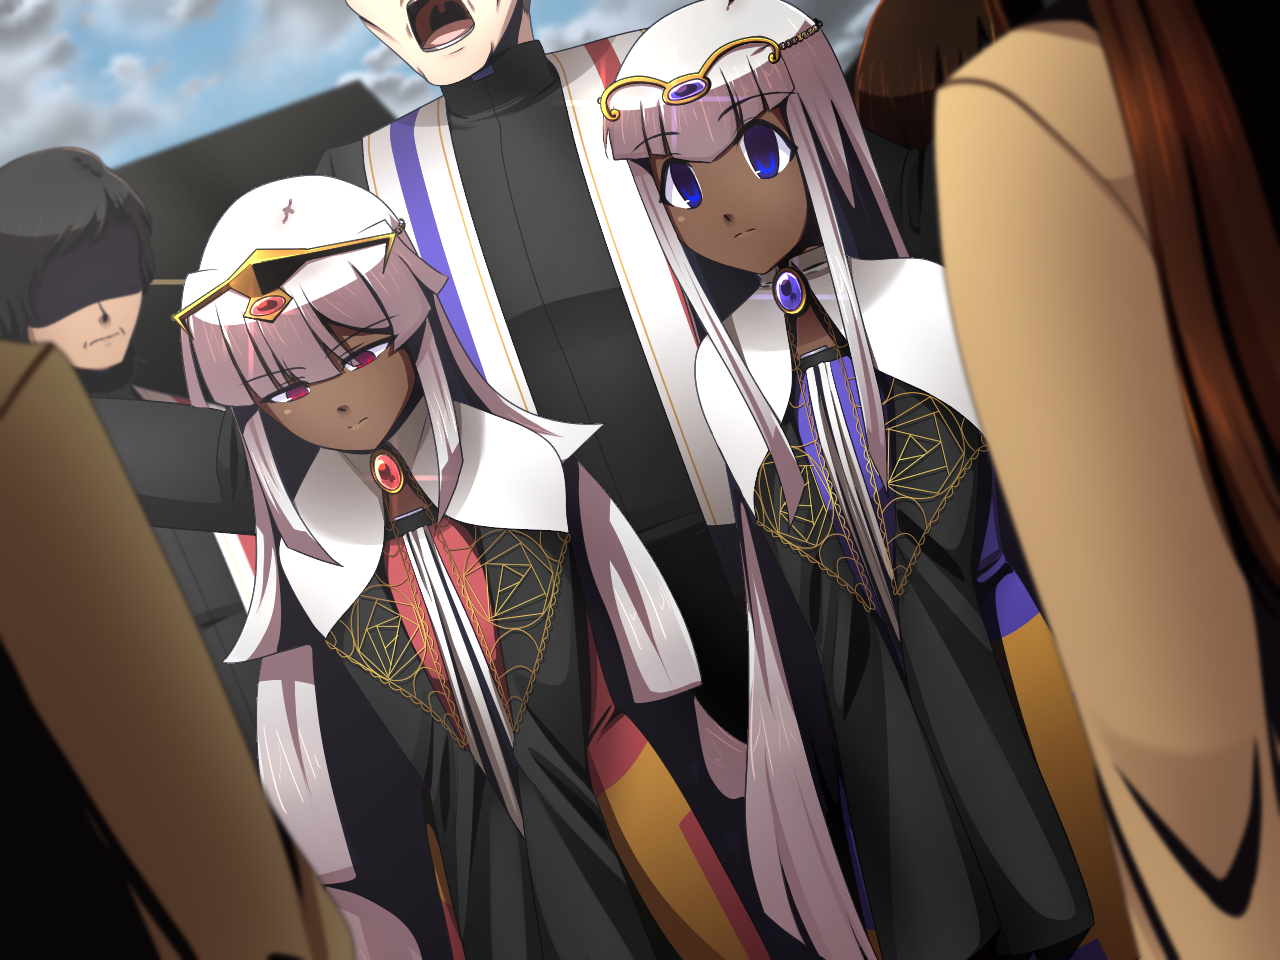 CG of Auma and Nyn standing in a crowd in town while wearing regal holy outfits. They have blank faces. The Head is directly behind them and preaching with arms outstretched.